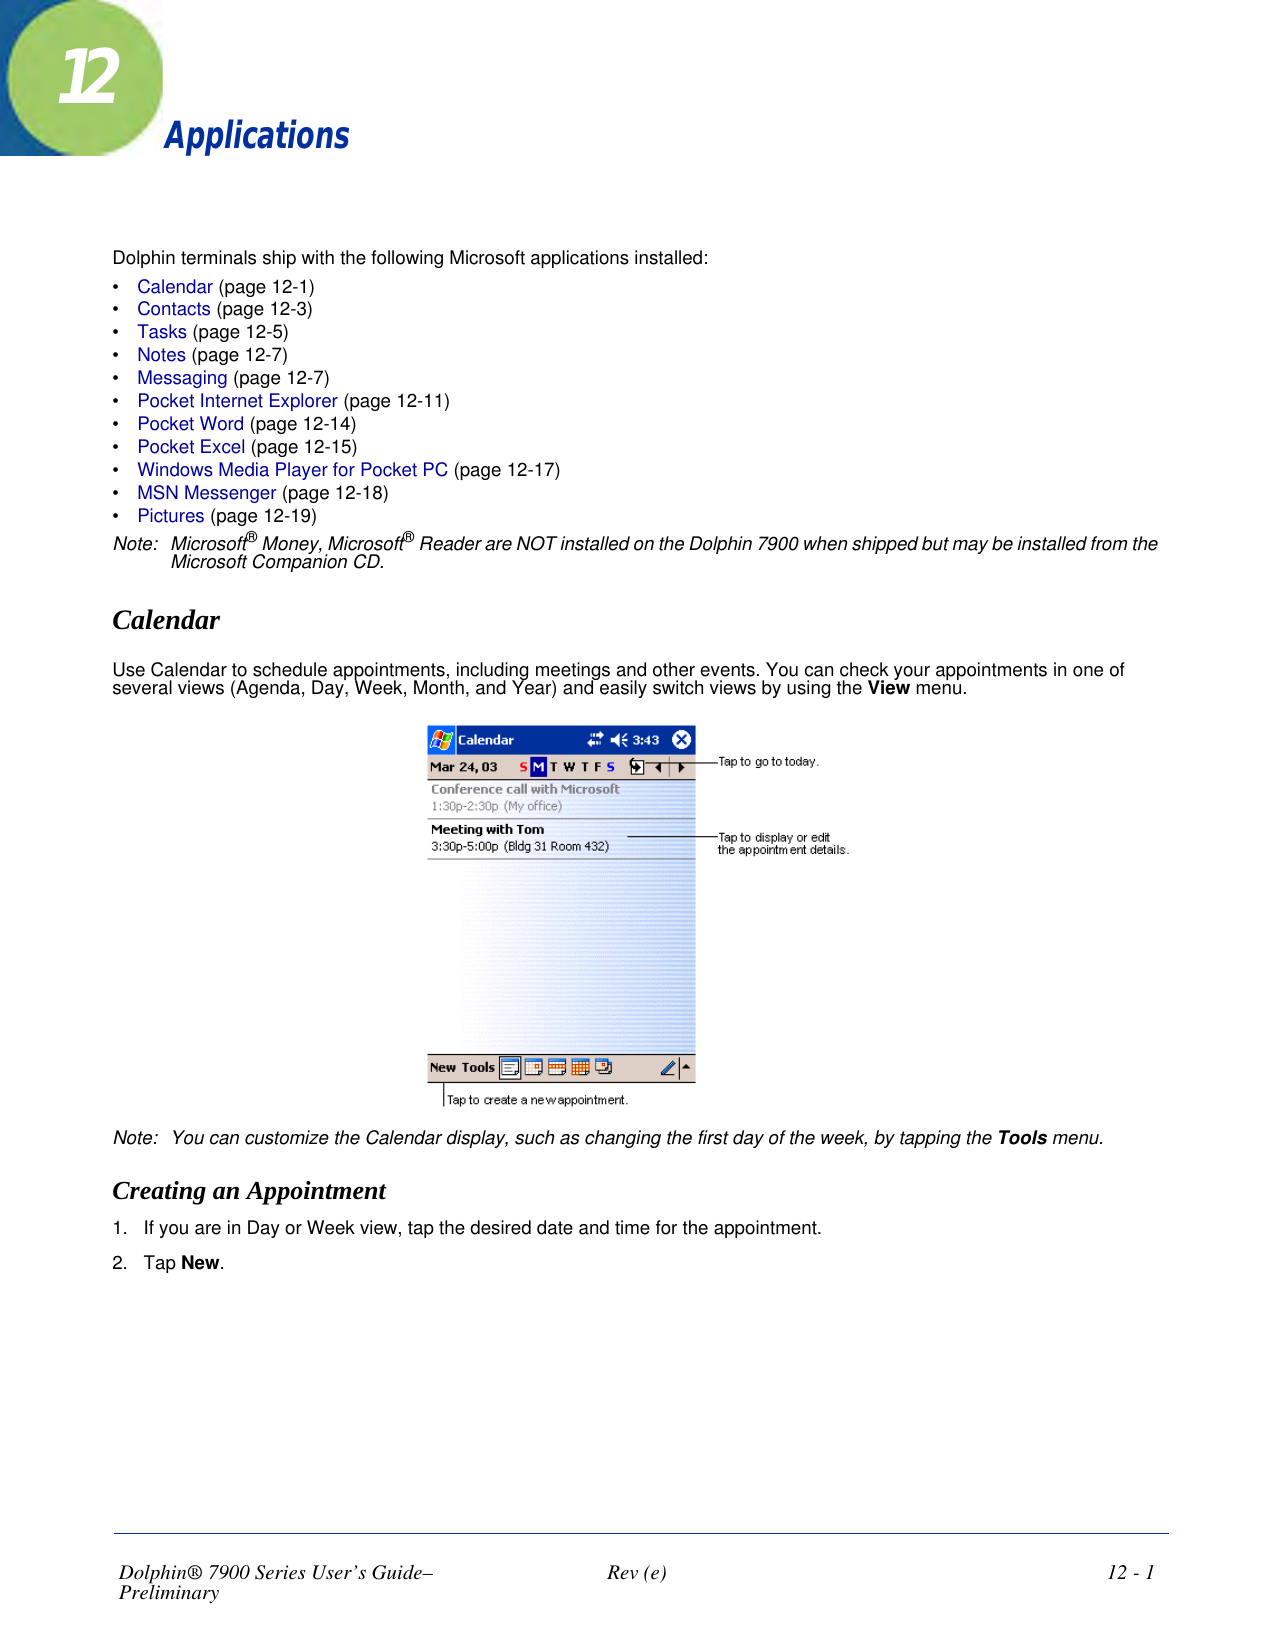 Dolphin® 7900 Series User’s Guide–Preliminary  Rev (e)  12 - 112ApplicationsDolphin terminals ship with the following Microsoft applications installed:•           Calendar (page 12-1)•           Contacts (page 12-3)•           Tasks (page 12-5)•           Notes (page 12-7)•           Messaging (page 12-7)•           Pocket Internet Explorer (page 12-11)•           Pocket Word (page 12-14)•           Pocket Excel (page 12-15)•           Windows Media Player for Pocket PC (page 12-17)•           MSN Messenger (page 12-18)•           Pictures (page 12-19)Note: Microsoft® Money, Microsoft® Reader are NOT installed on the Dolphin 7900 when shipped but may be installed from the Microsoft Companion CD.CalendarUse Calendar to schedule appointments, including meetings and other events. You can check your appointments in one of several views (Agenda, Day, Week, Month, and Year) and easily switch views by using the View menu.Note: You can customize the Calendar display, such as changing the first day of the week, by tapping the Tools menu. Creating an Appointment1. If you are in Day or Week view, tap the desired date and time for the appointment.2. Tap New.